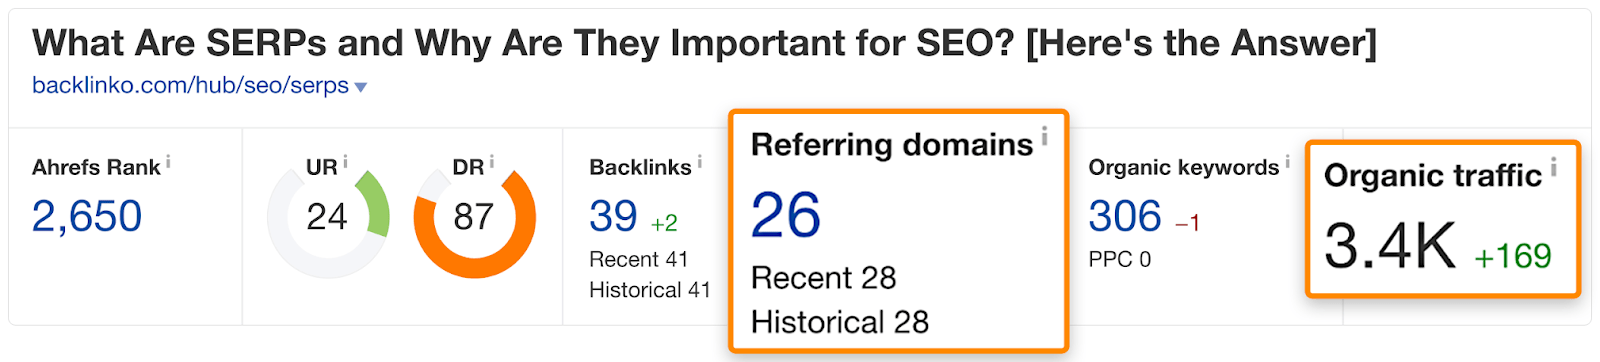 9 competitor serp features